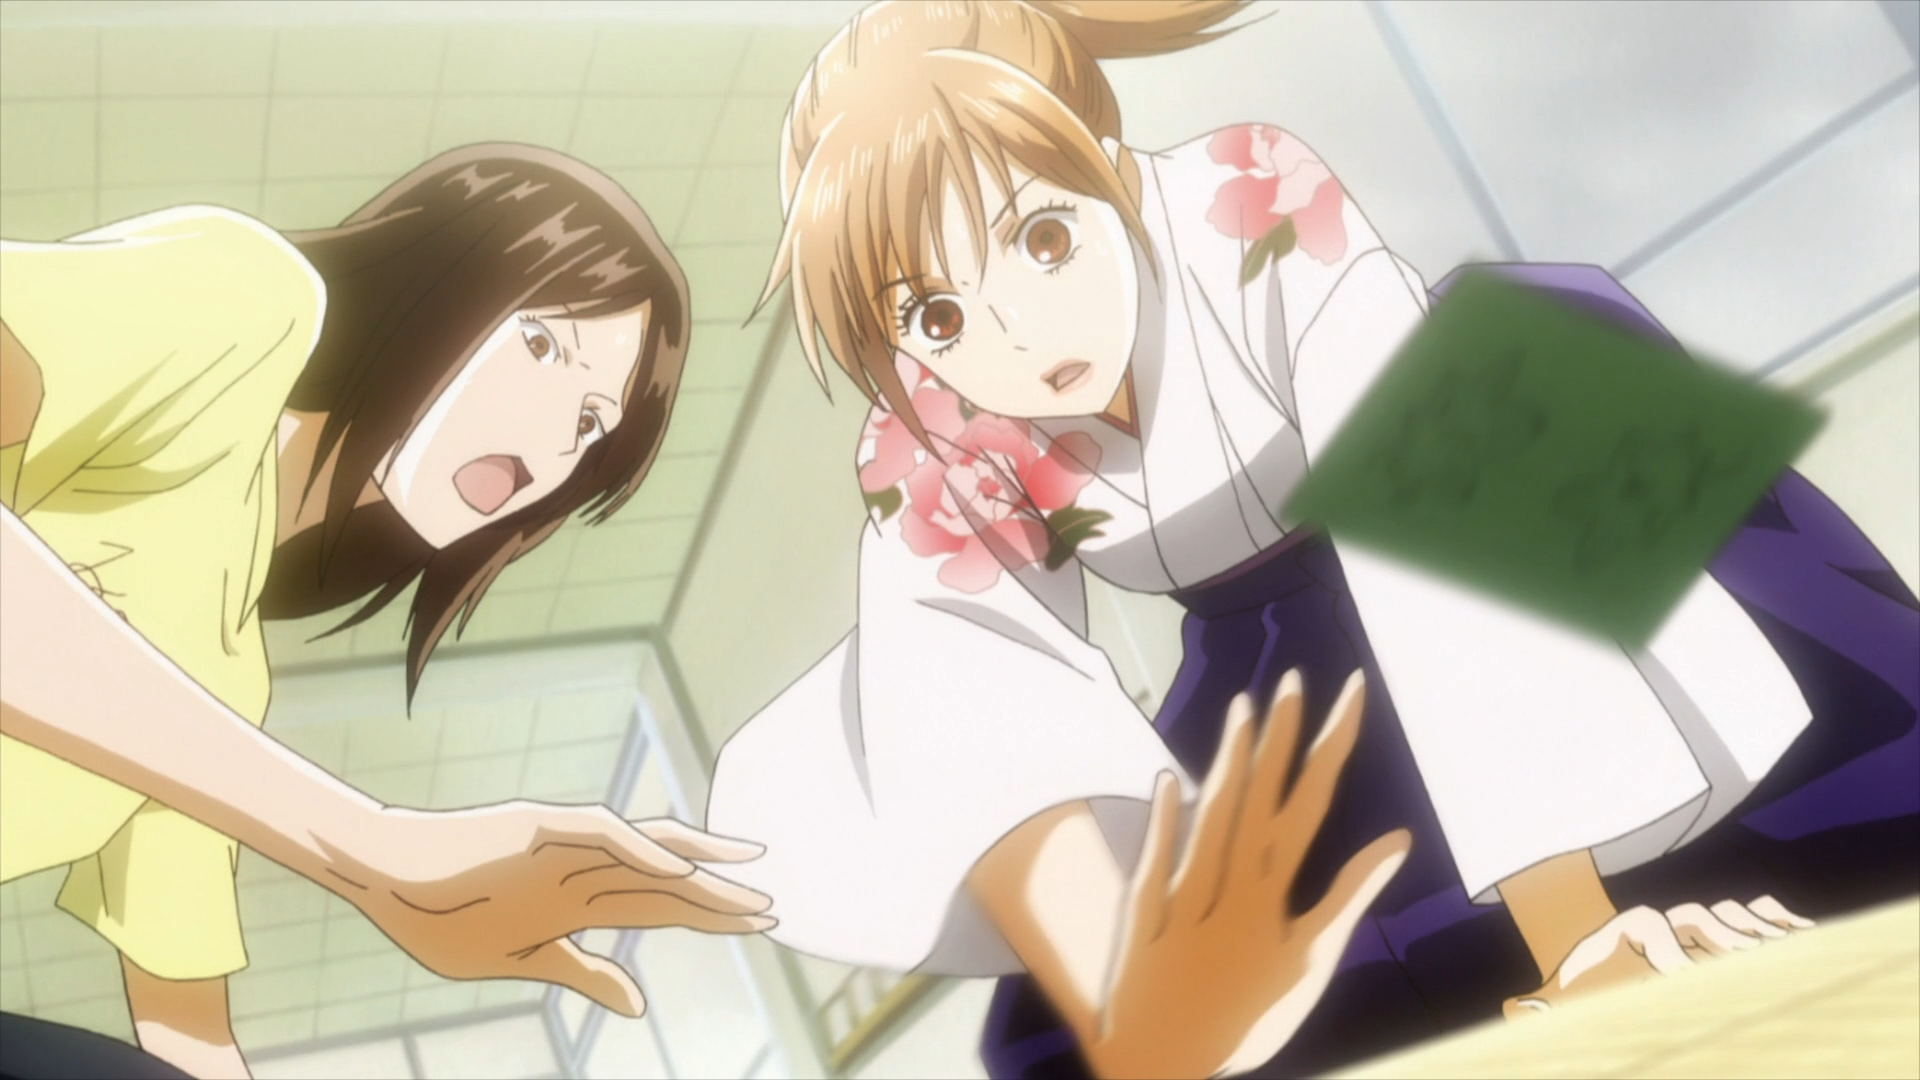 Chihaya Ayase claims a card in a game of competitive karuta in a scene from the Chihayafuru TV anime.